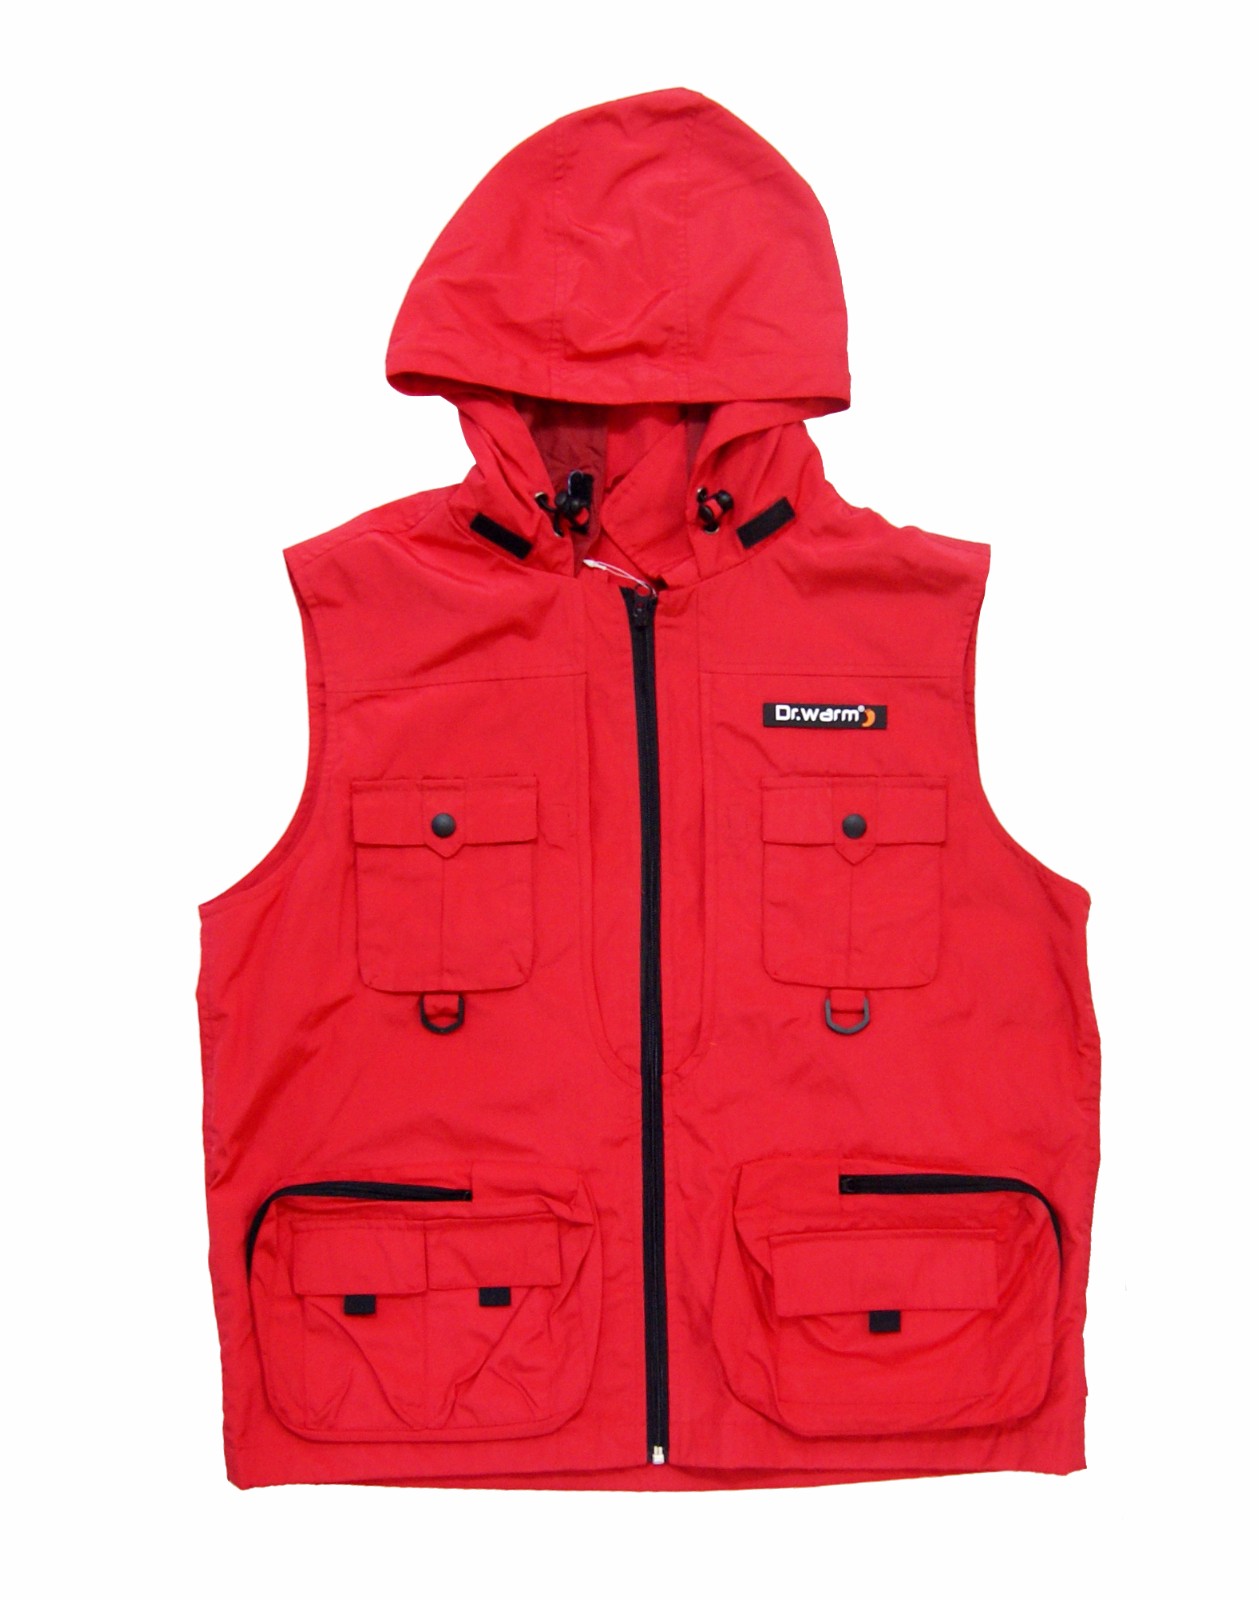 Dr. Warm vest electric heated vest with prined pattern for indoor use-9